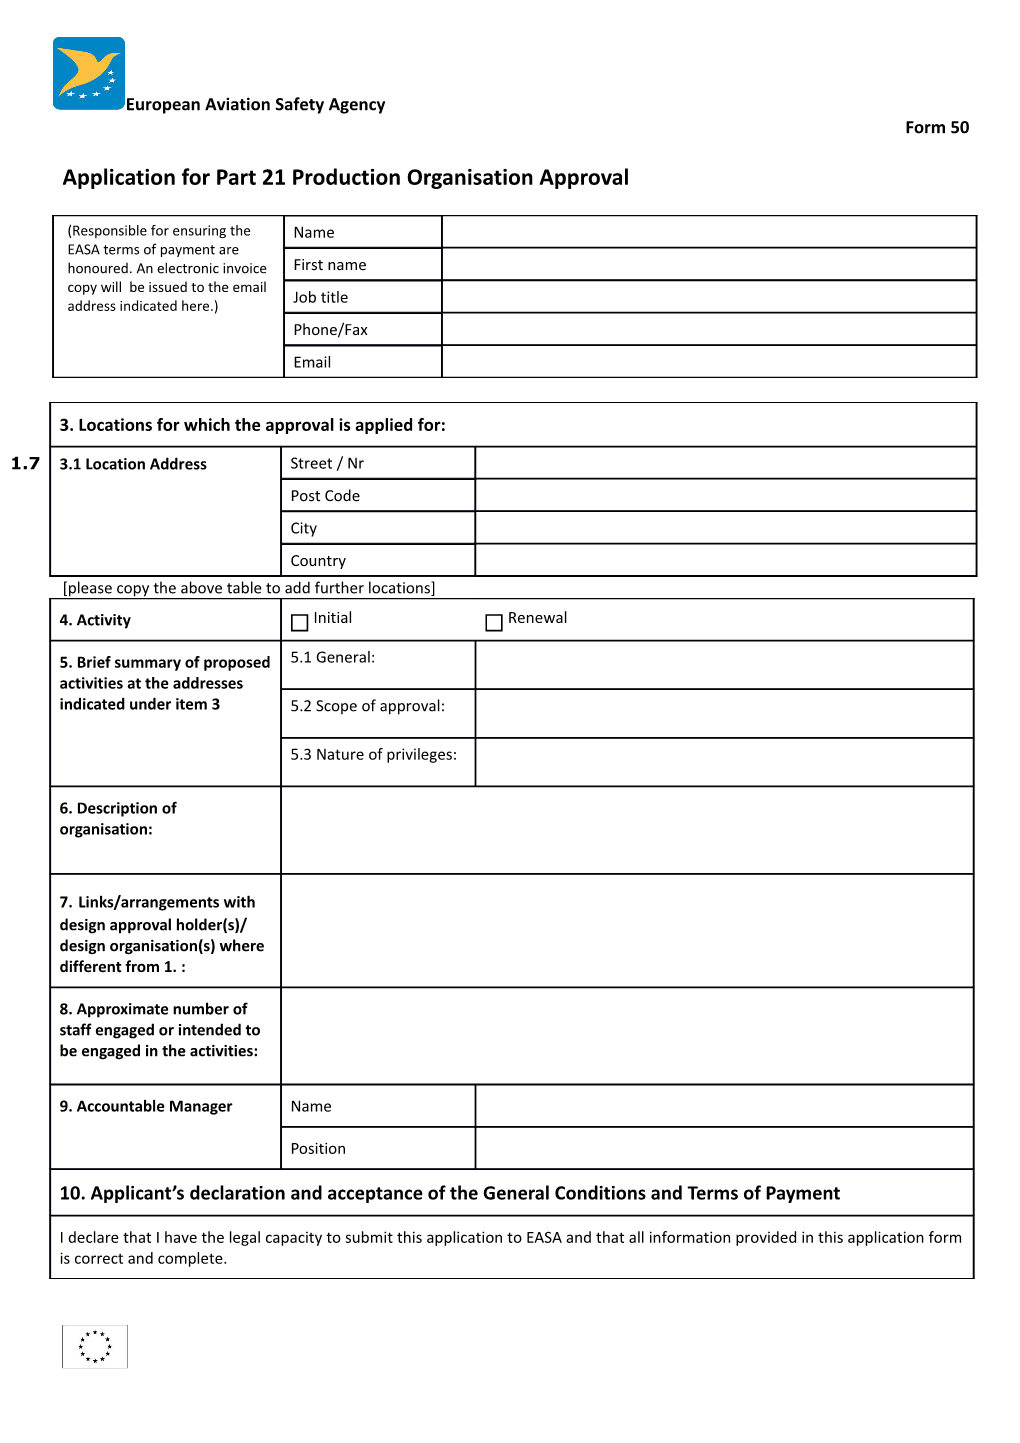 Application for Part 21 Production Organisation Approval